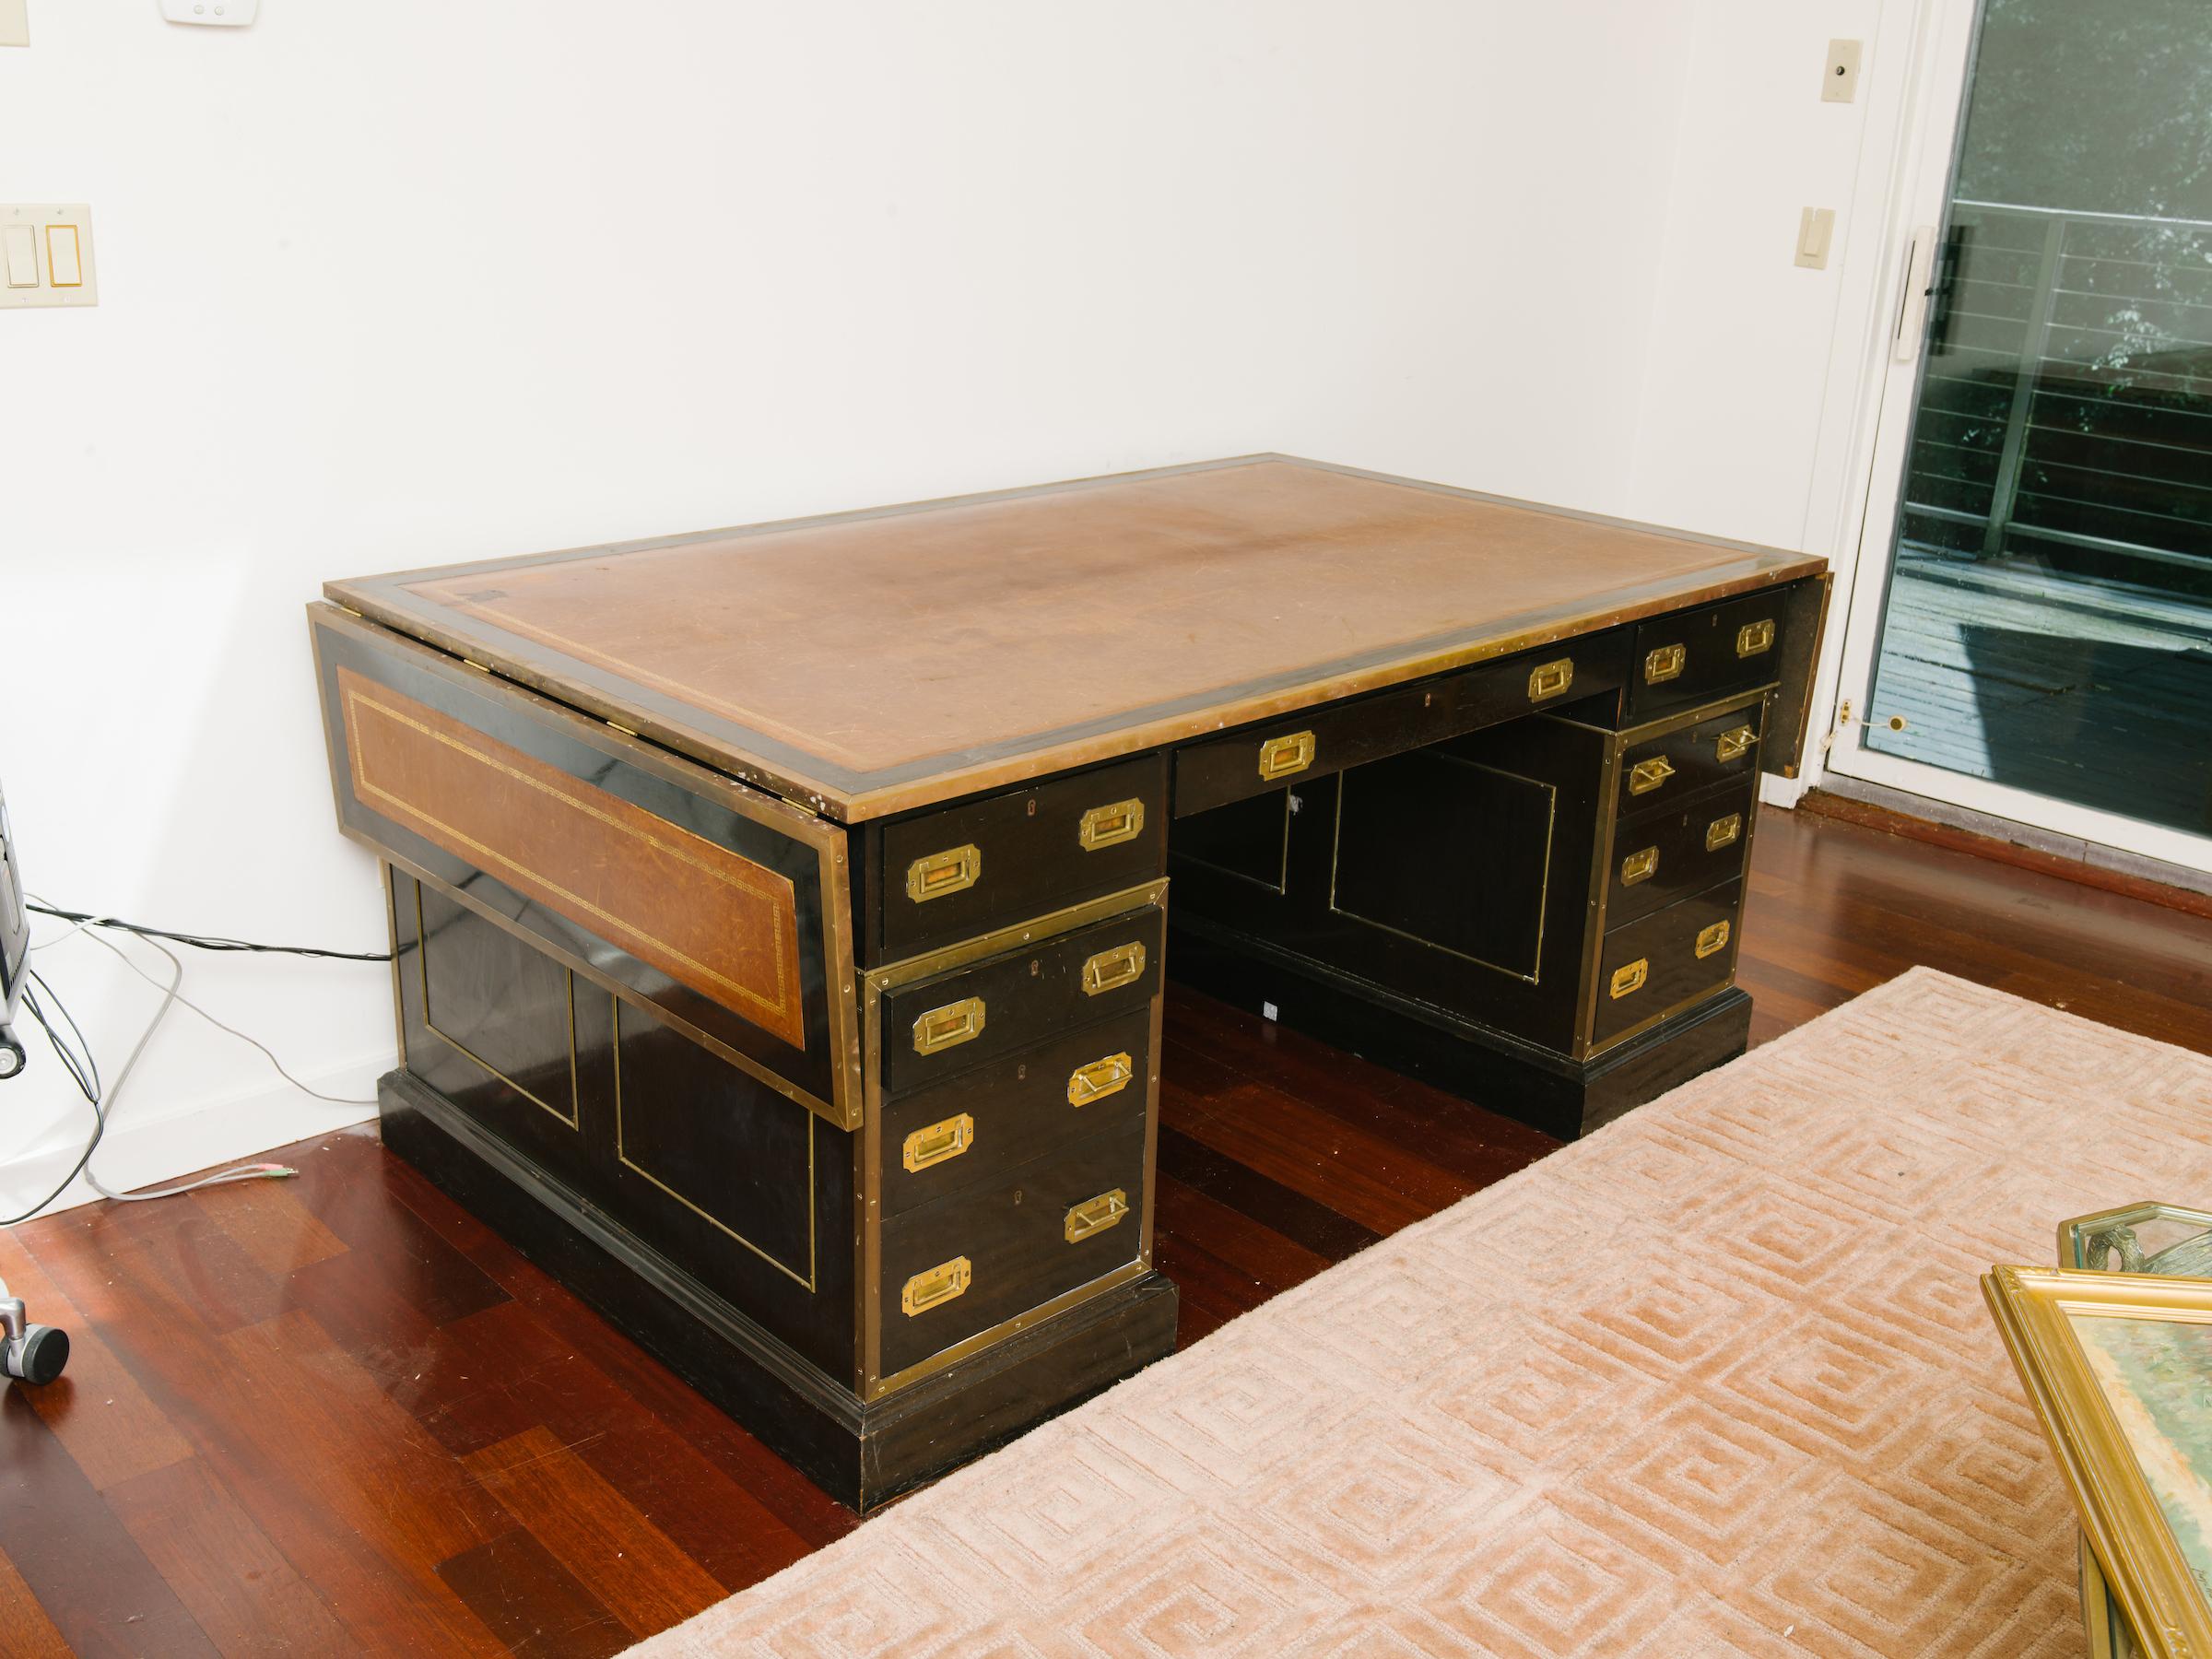 1920s English leather top partners desk with side extensions. Double-sided, drawers on both sides. Once owned by Mariah Carrey and Tommy Mottola when they lived in Bedford, NY. 
When the side extensions are up, the total width is 94 inches.